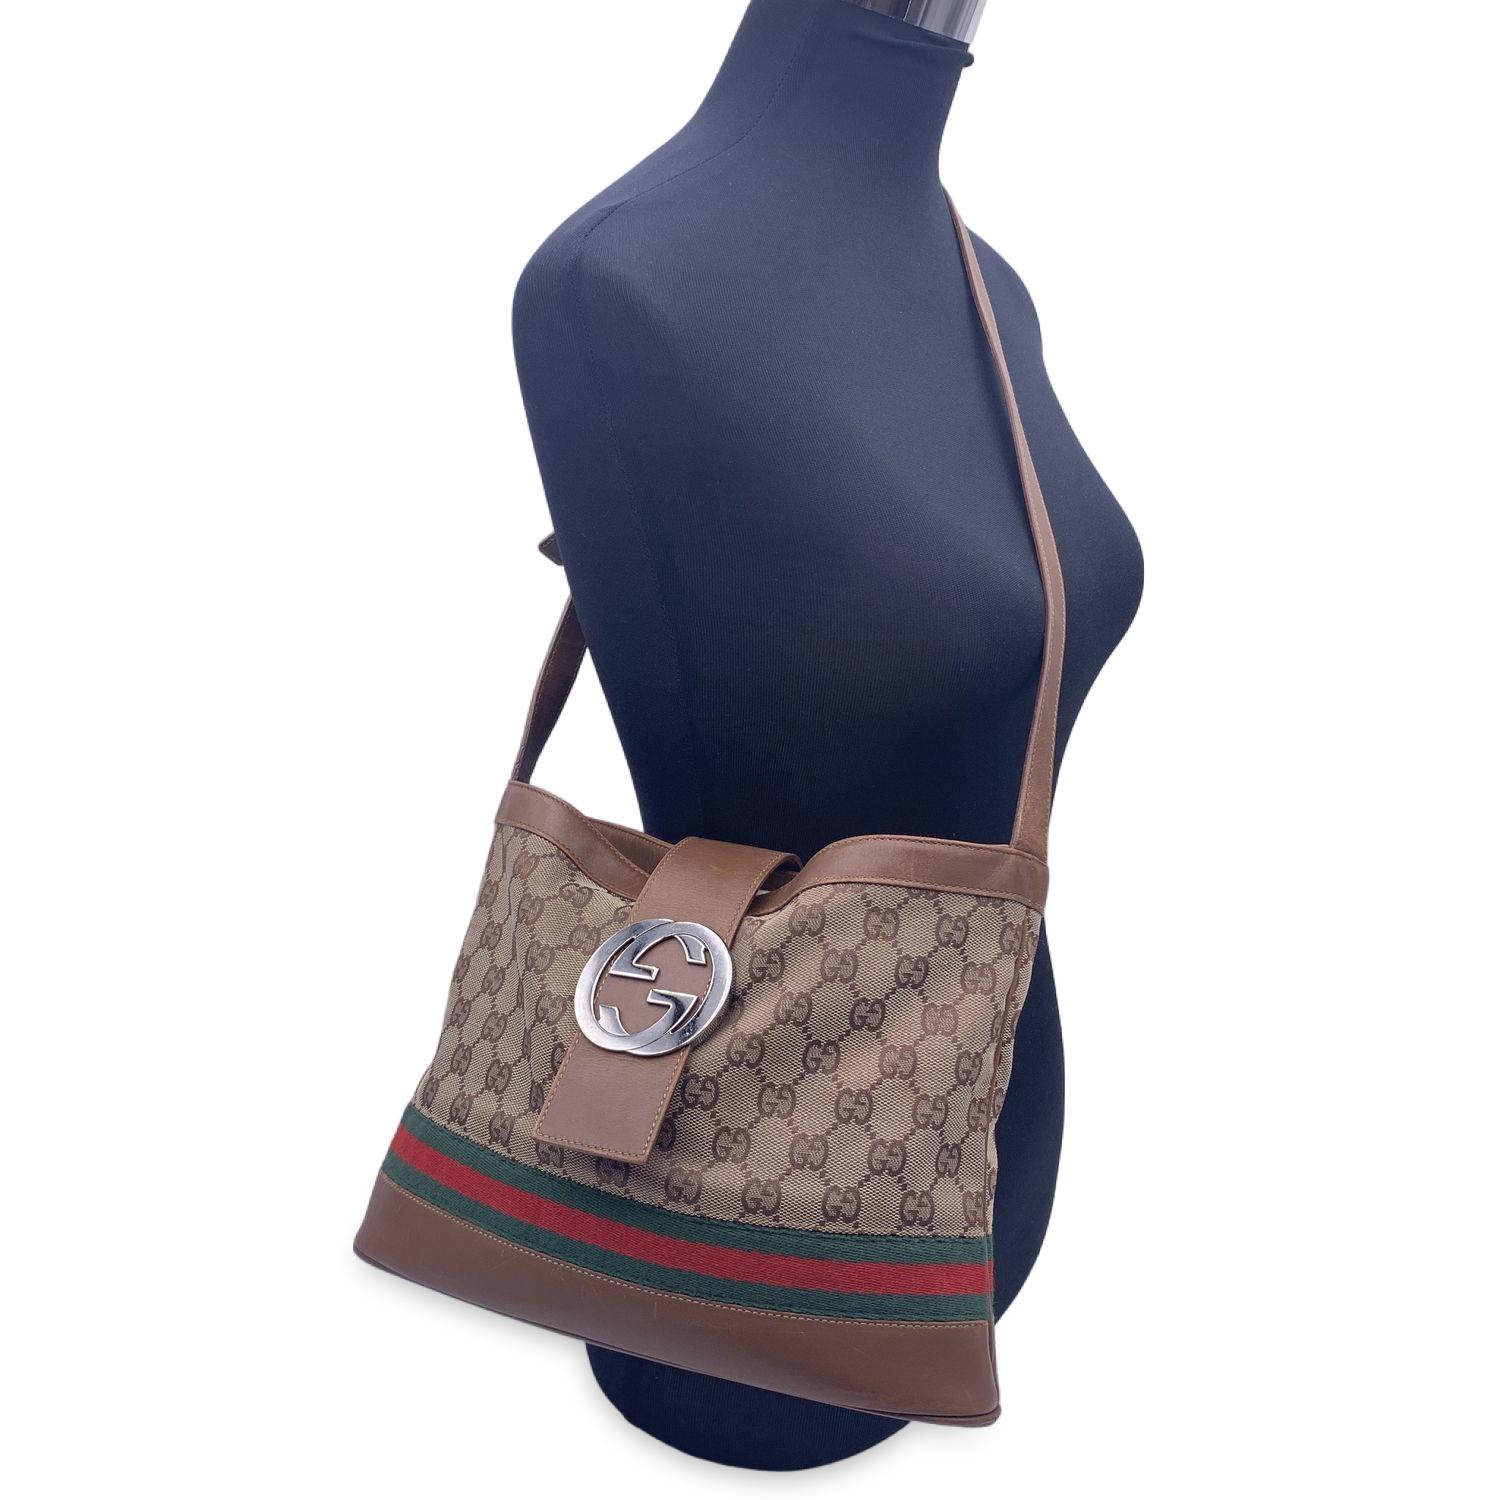 Limited edition Gucci 'GG Sherry Line' shoulder bag crafted in beige monogram canvas with light brown leather trim. Green/Red/Green stripes on the lower part of the bag. Fold-over strap with silver metal GG - GUCCI logo on the front. 'Gucci